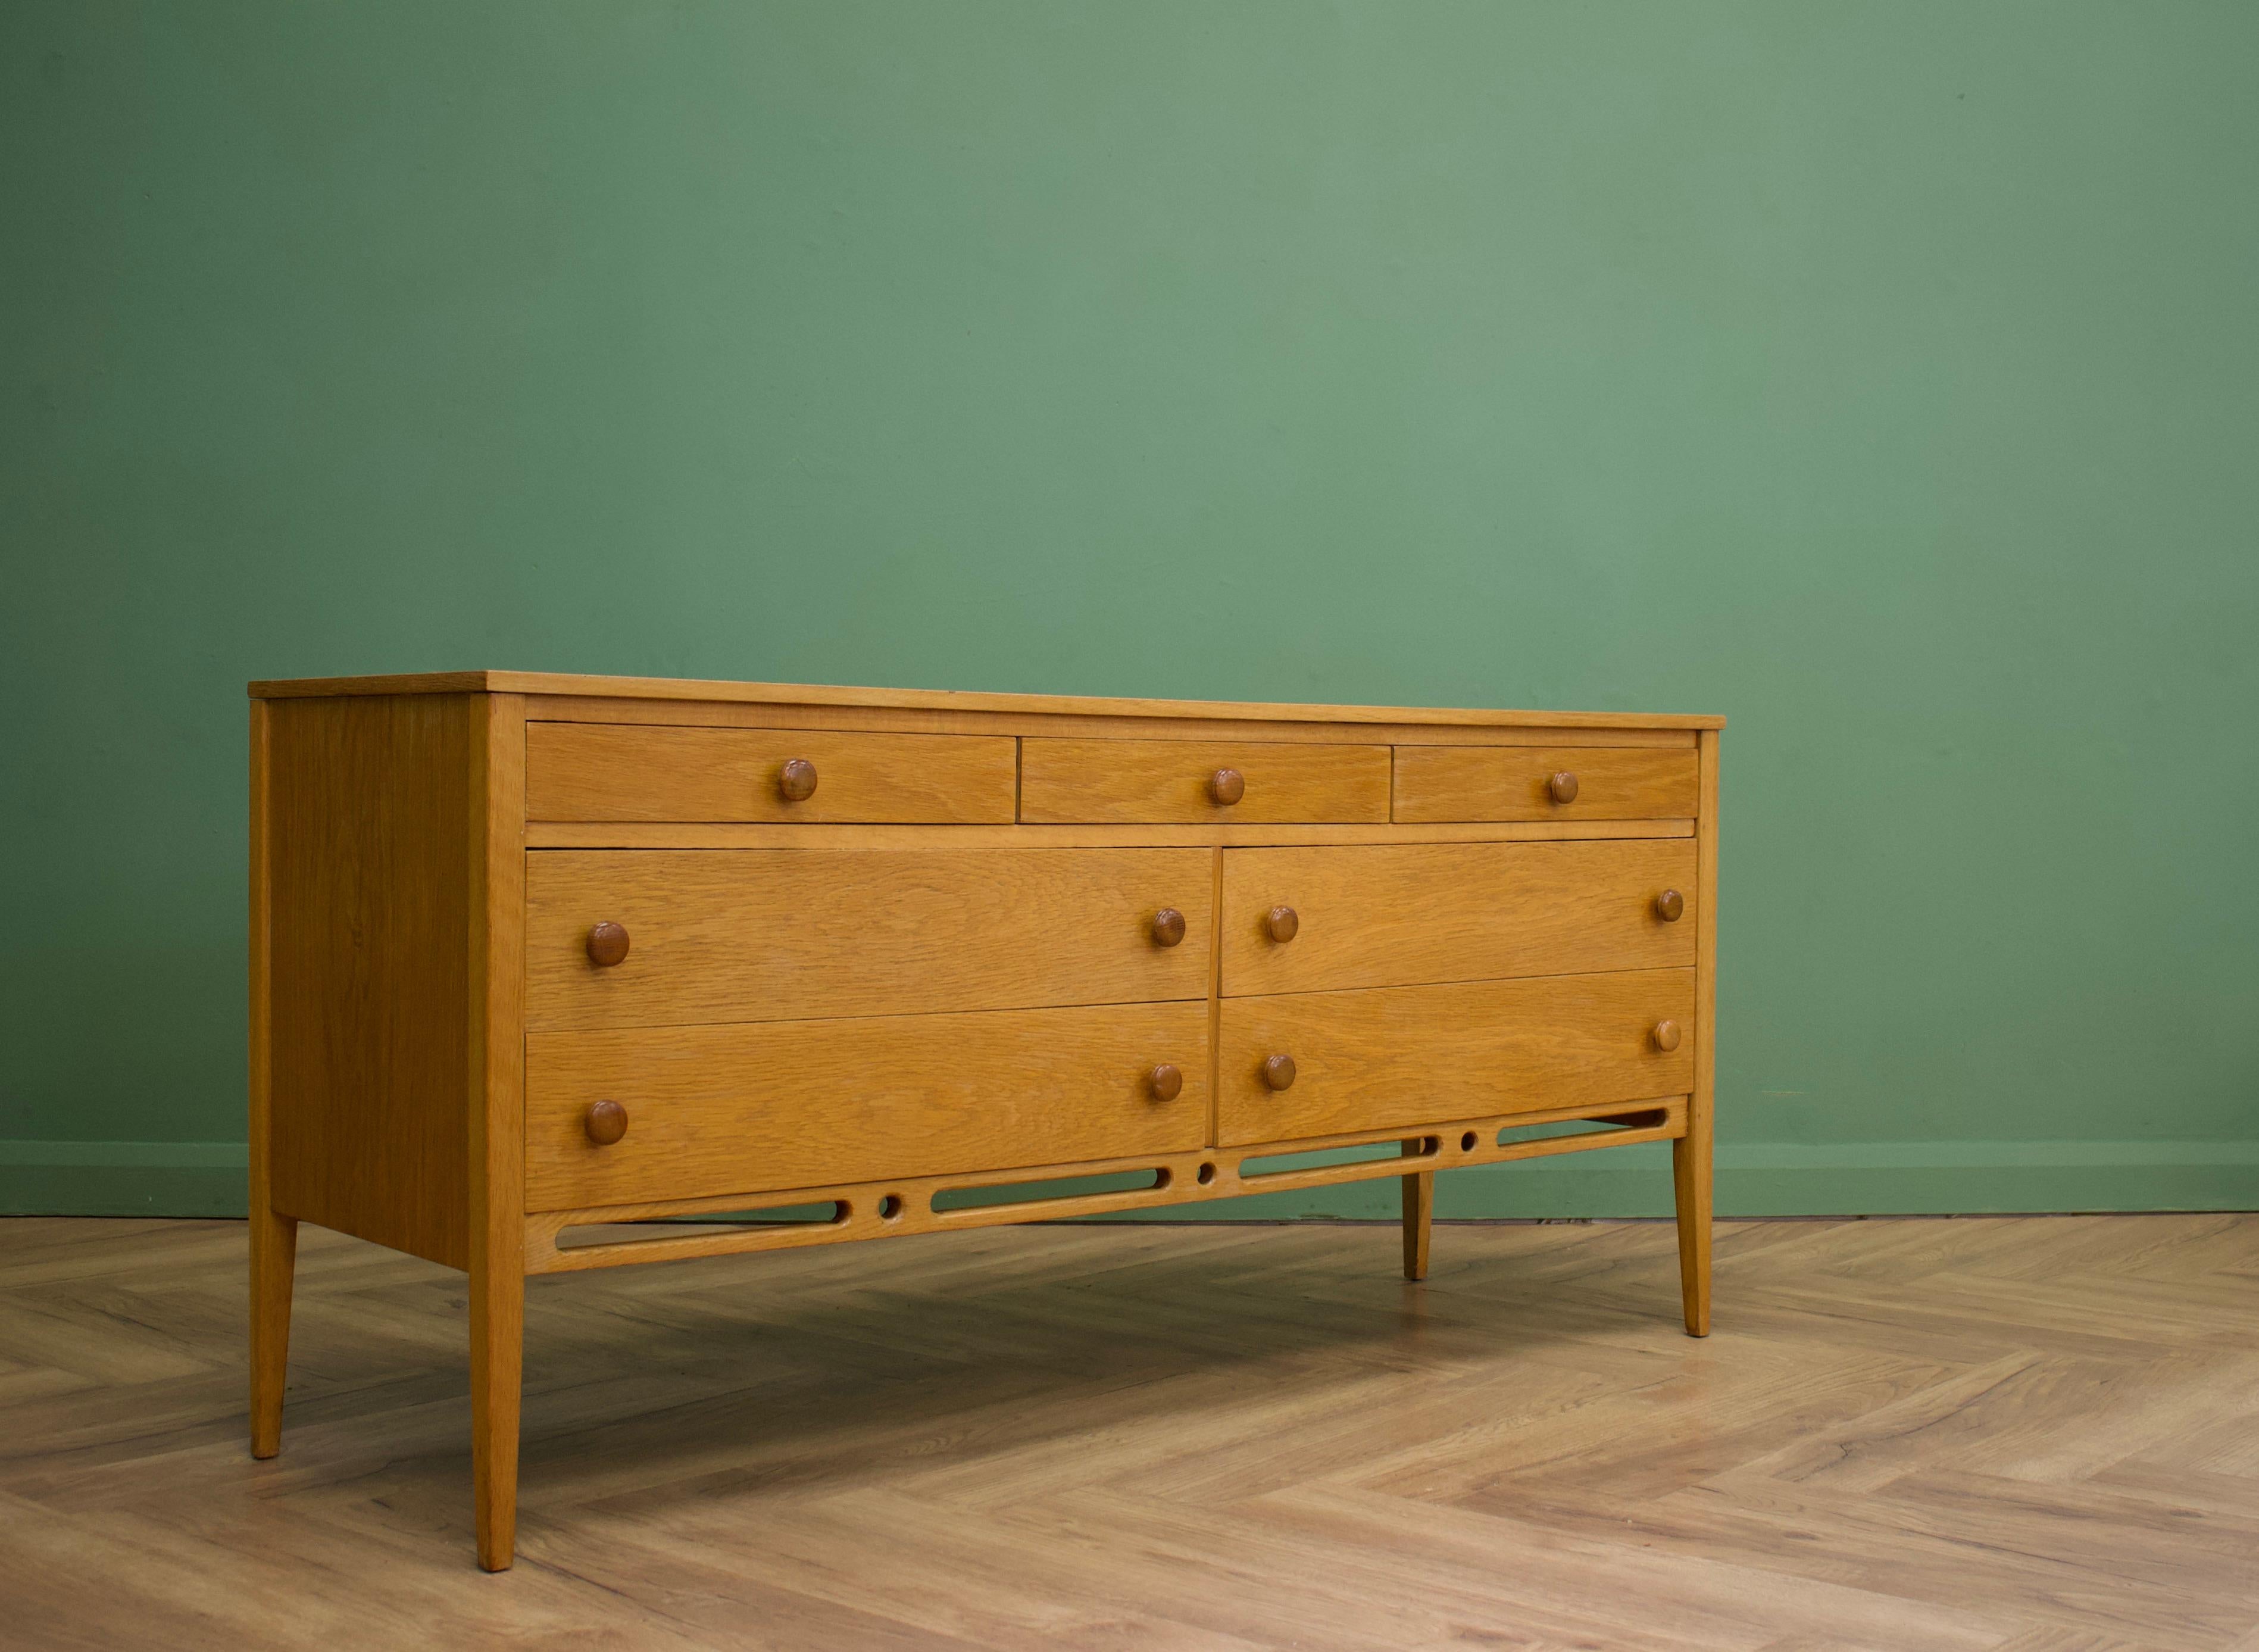 - Midcentury dresser or compact sideboard
- Designed by John Herbert.
- Manufactured in the UK by Younger.
- Made from oak and oak veneer.